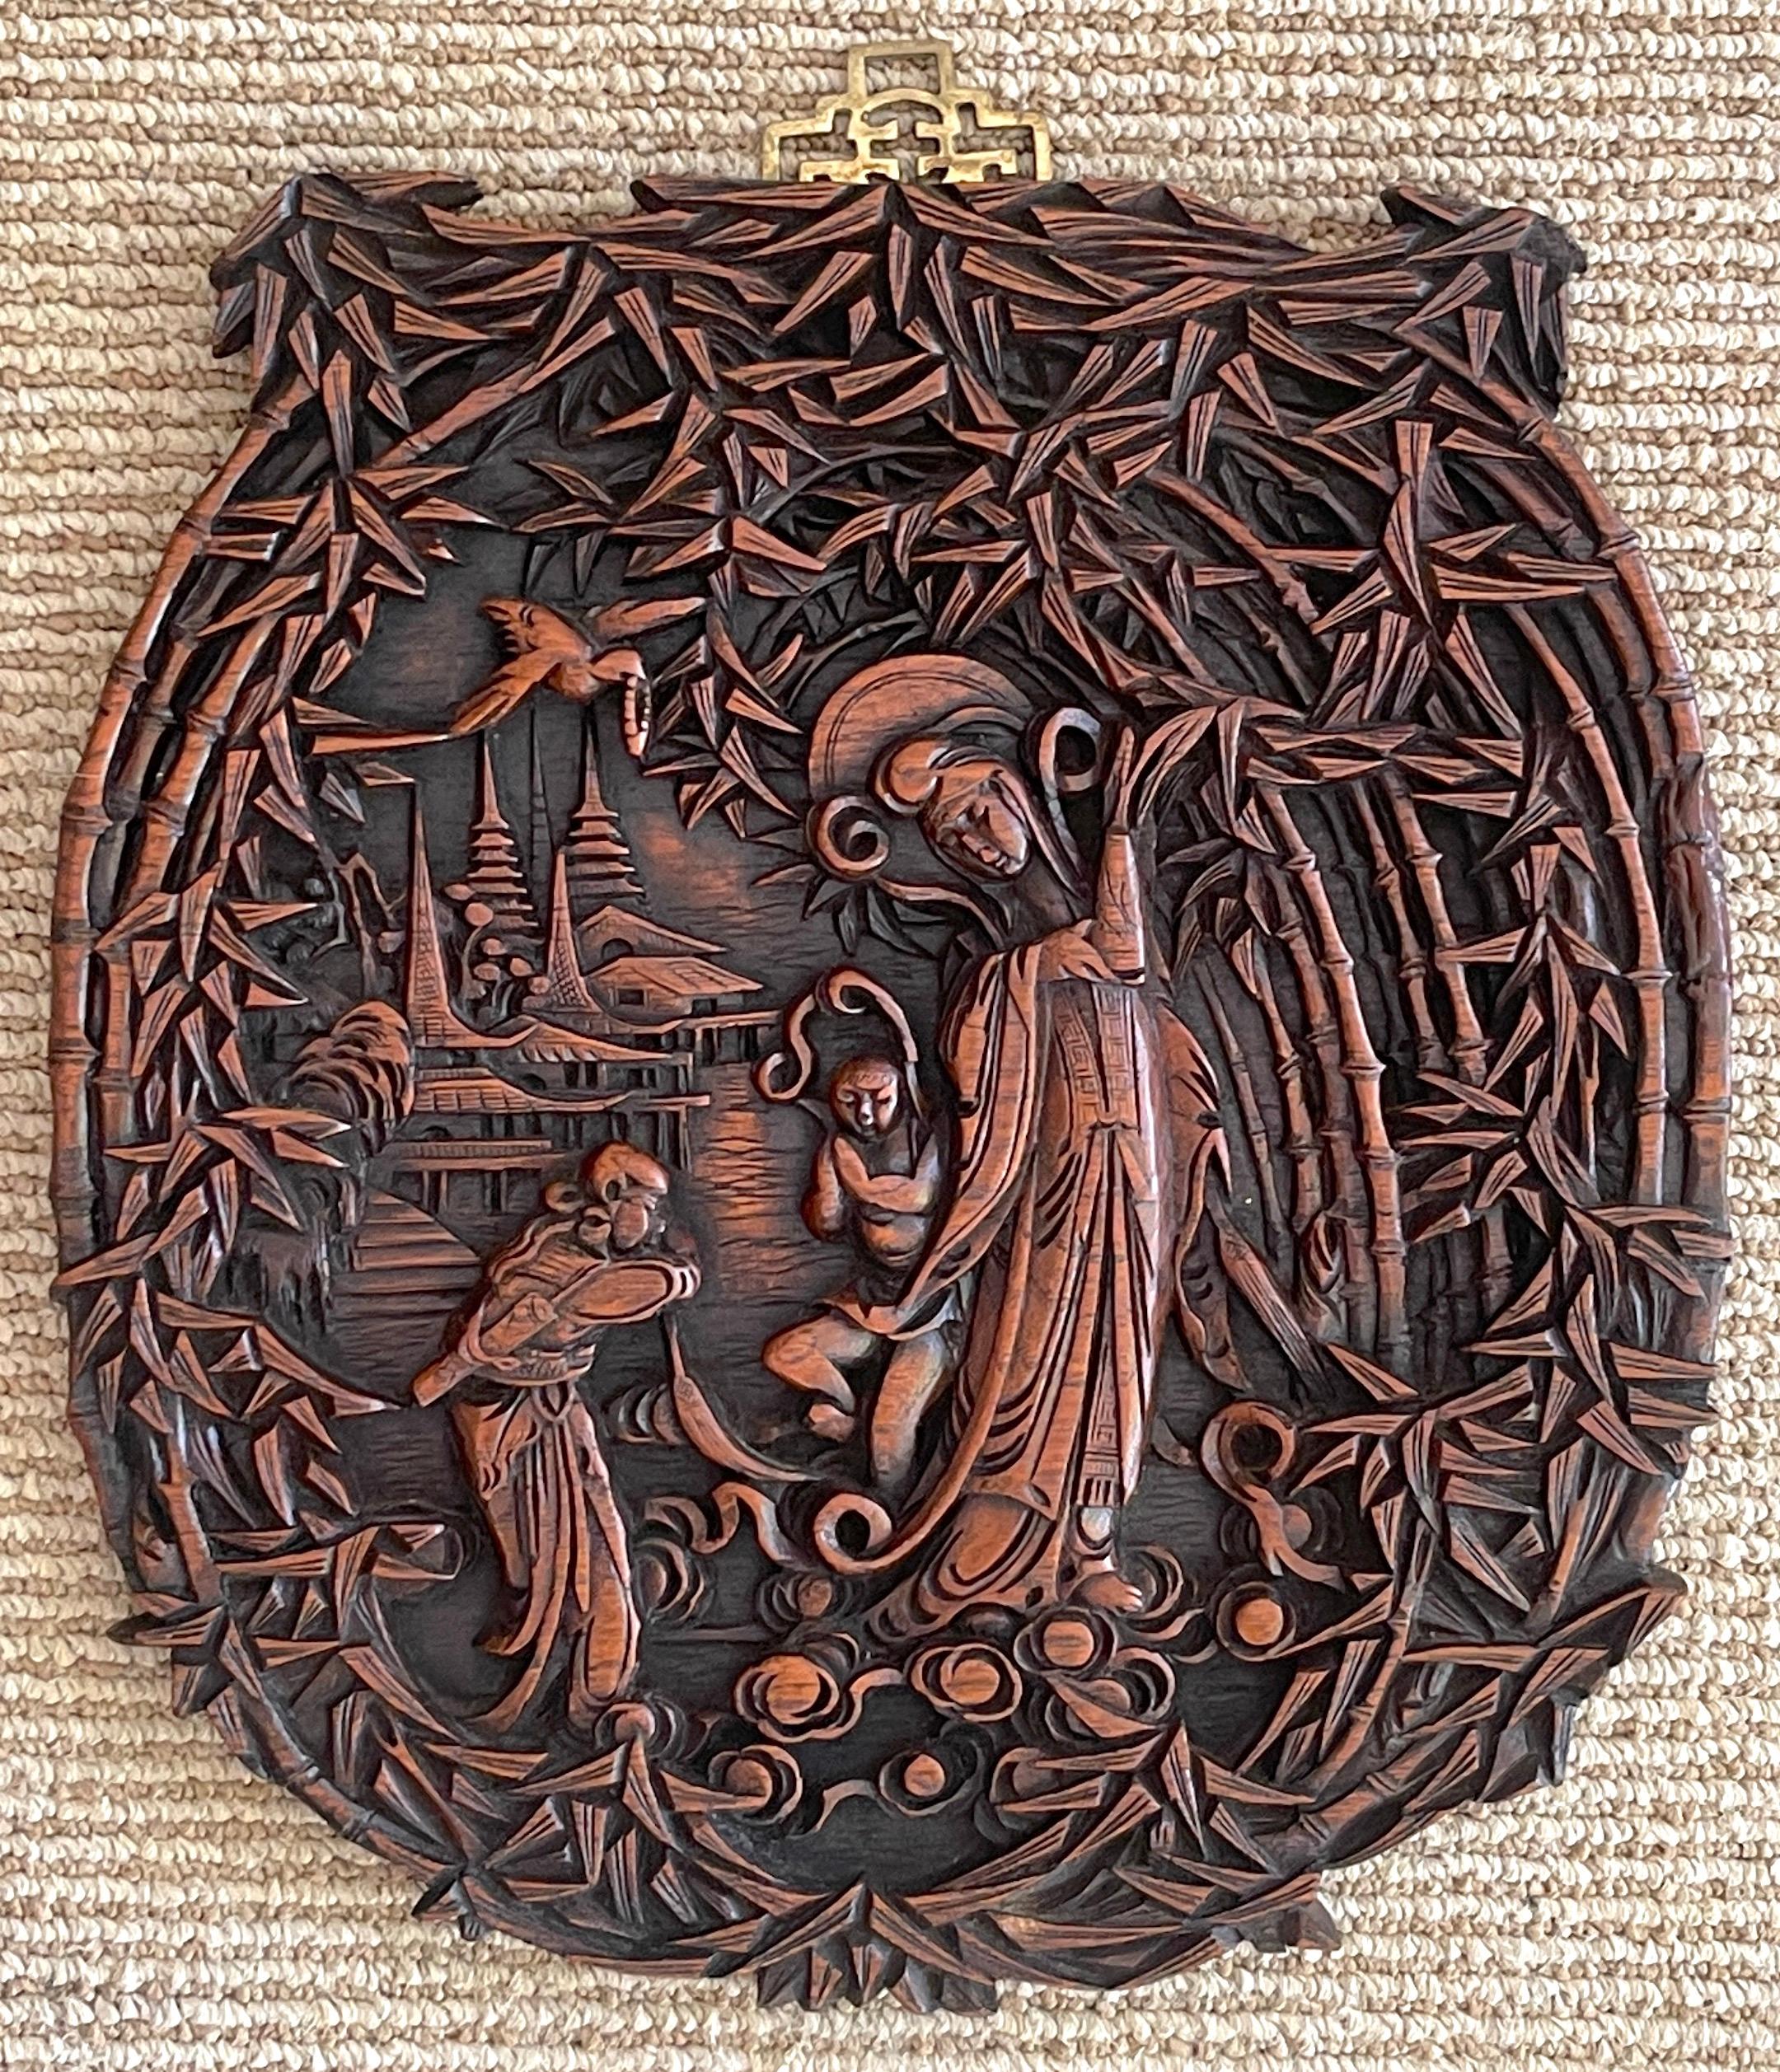 Chinese Export Hardwood Carved Plaque of Quan Yin in Landscape 
China, circa 1920s

Expertly hand carved landscape plaque of Quan Yin the Buddhist goddess of compassion, mercy, and healing and the eternal protector of women and children. Mounted